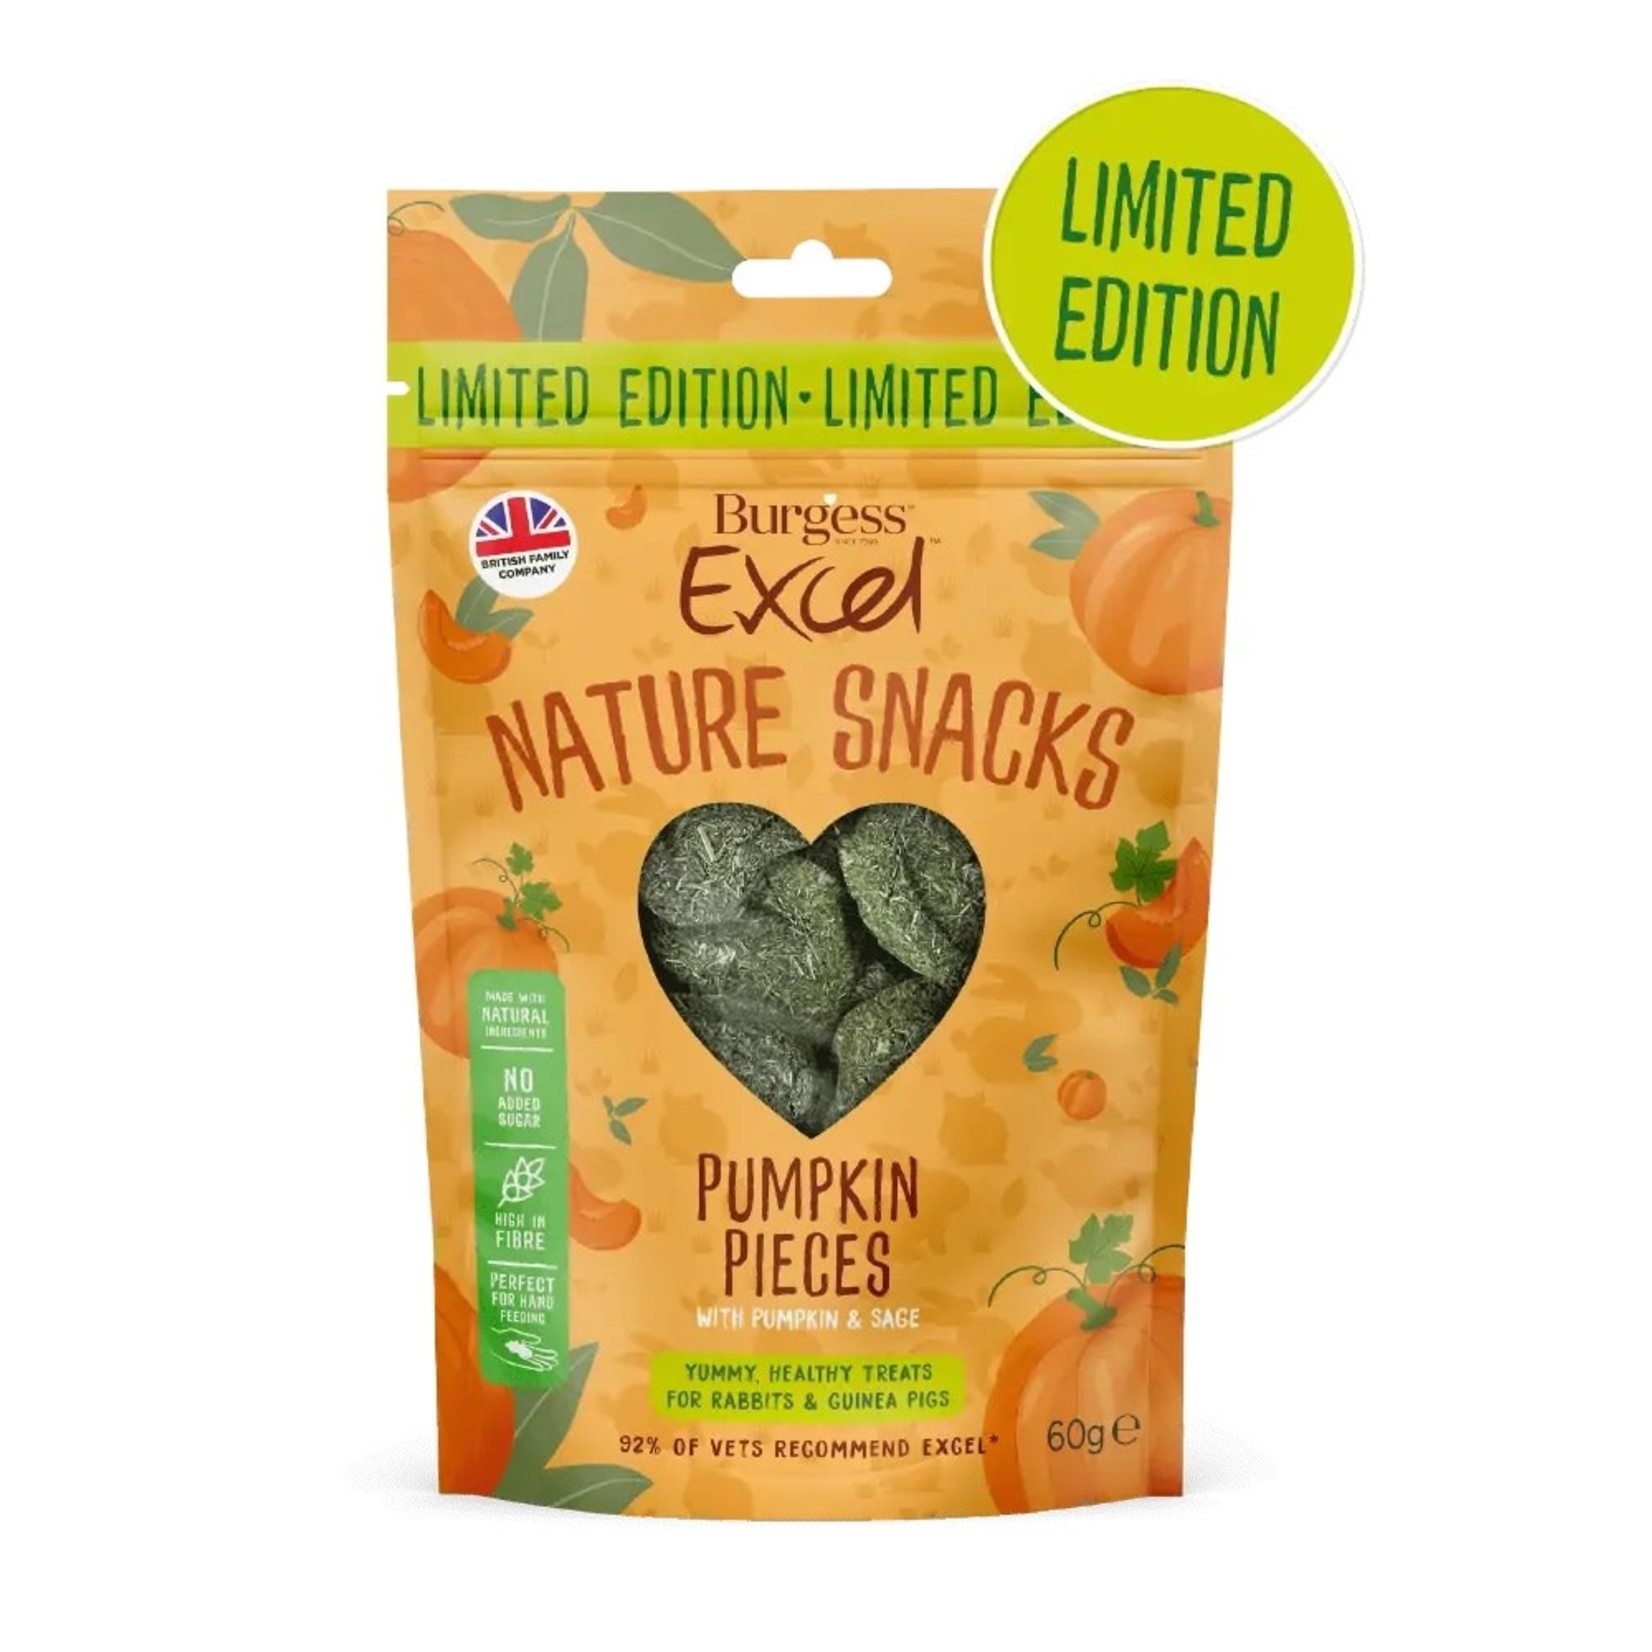 Burgess Excel Nature Snacks Limited Edition Rabbit & Guinea Pig Treats, 60g